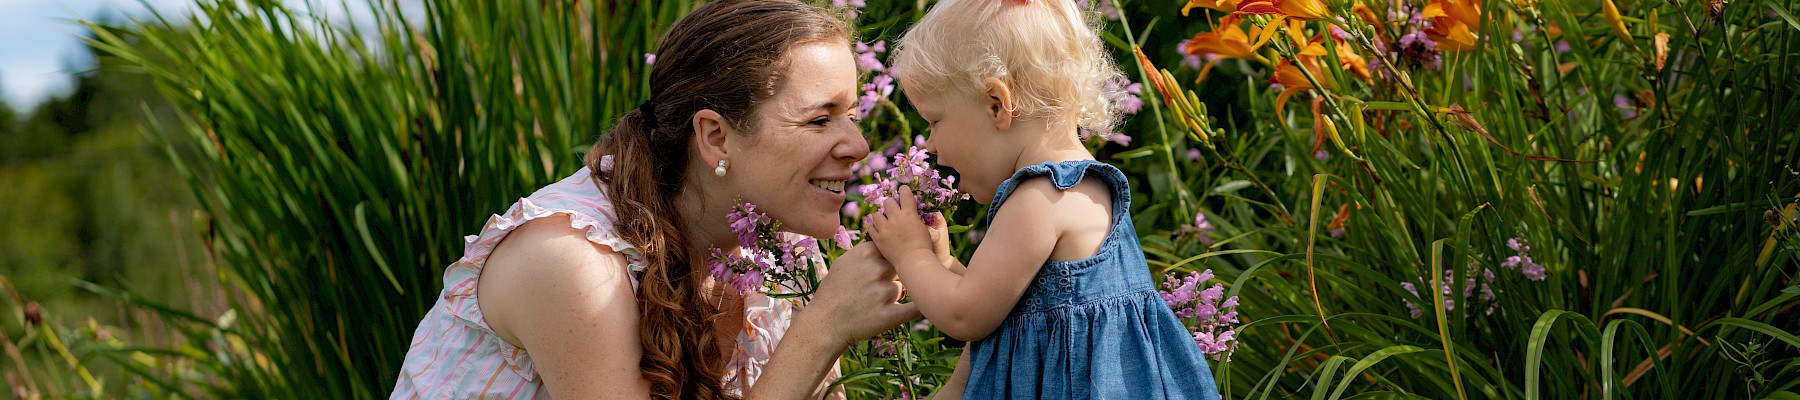 A woman and a child are smelling flowers in a garden, surrounded by lush greenery and blooming orange lilies.